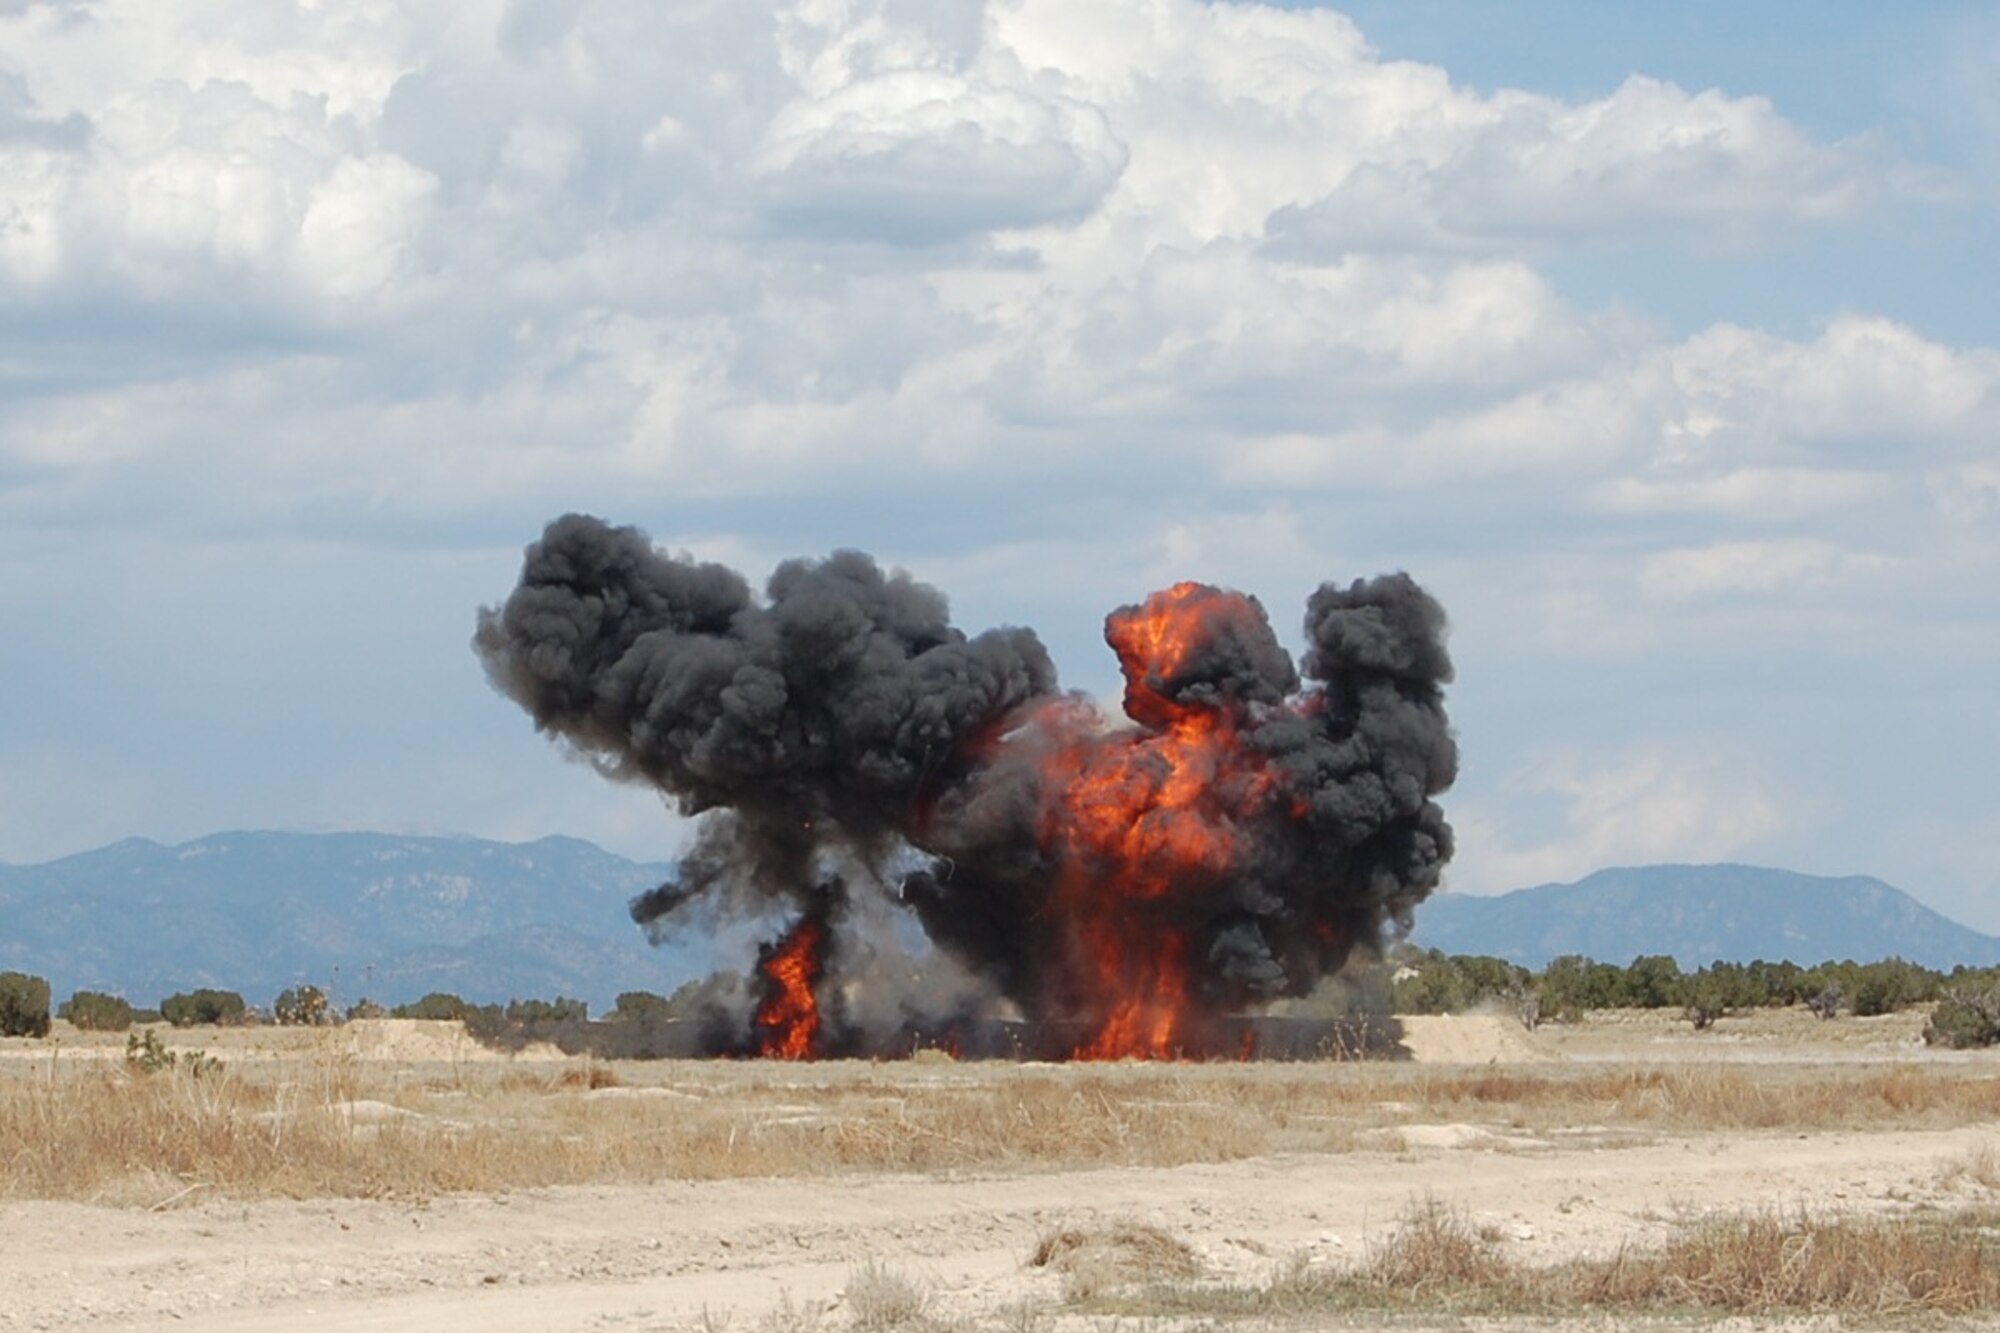 The 140th Explosive Ordnance Disposal Flight members built and detonated several explosives during the EOD Demo Day July 12, 2013 at Airburst Range, Fort Carson, Colo. as part of their routine training requirements. (U.S. Air National Guard photo by Capt. Kinder Blacke)